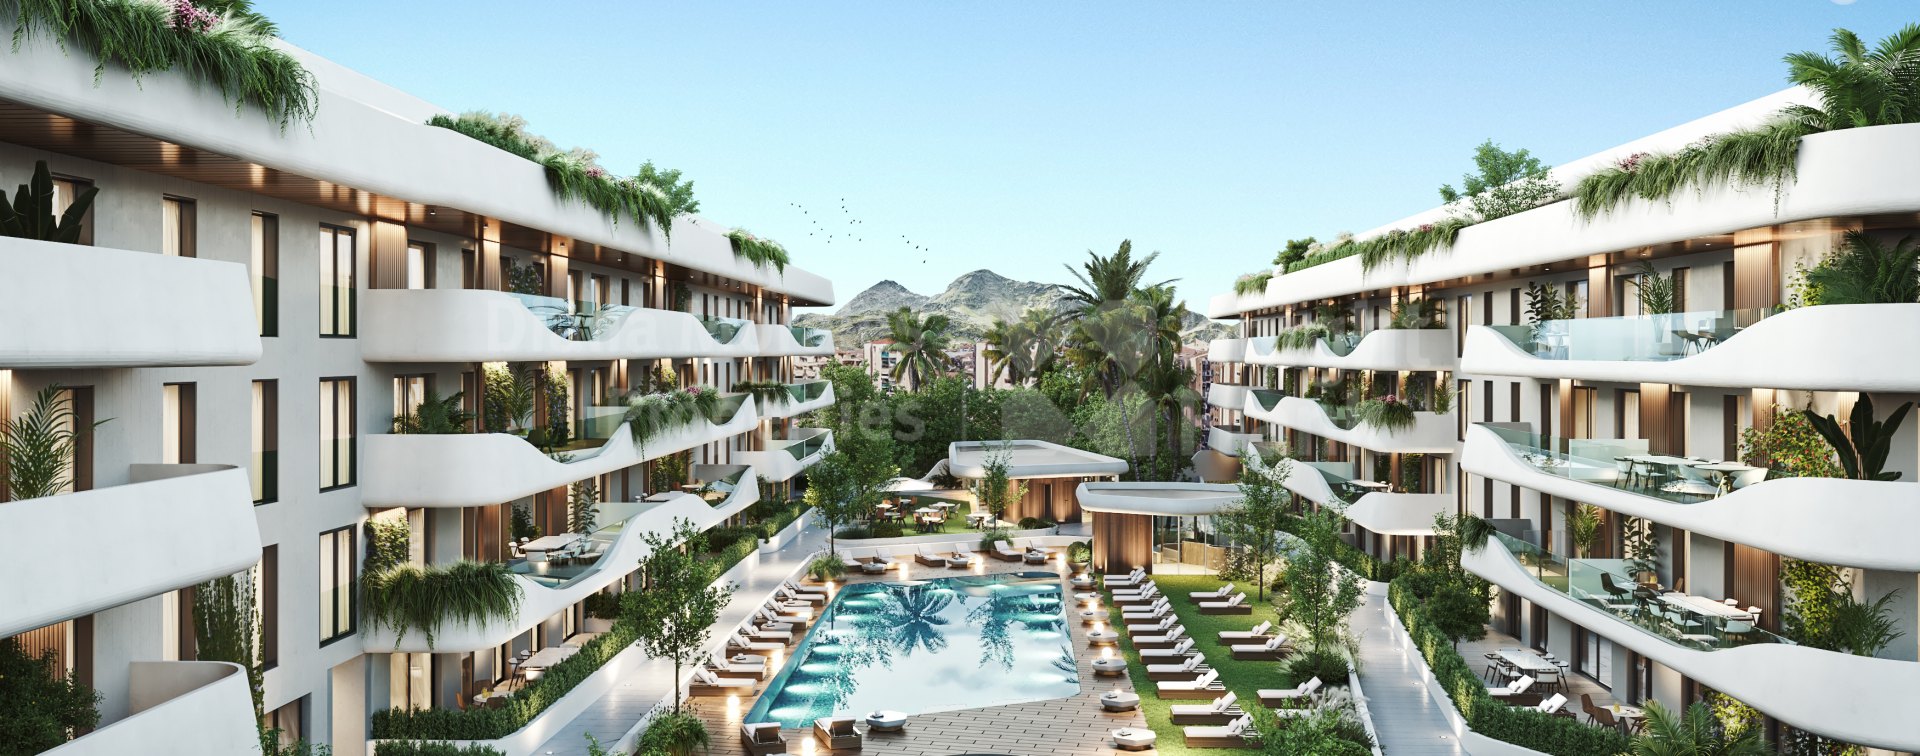 Salvia, a new complex of apartments within walking distance to the beach